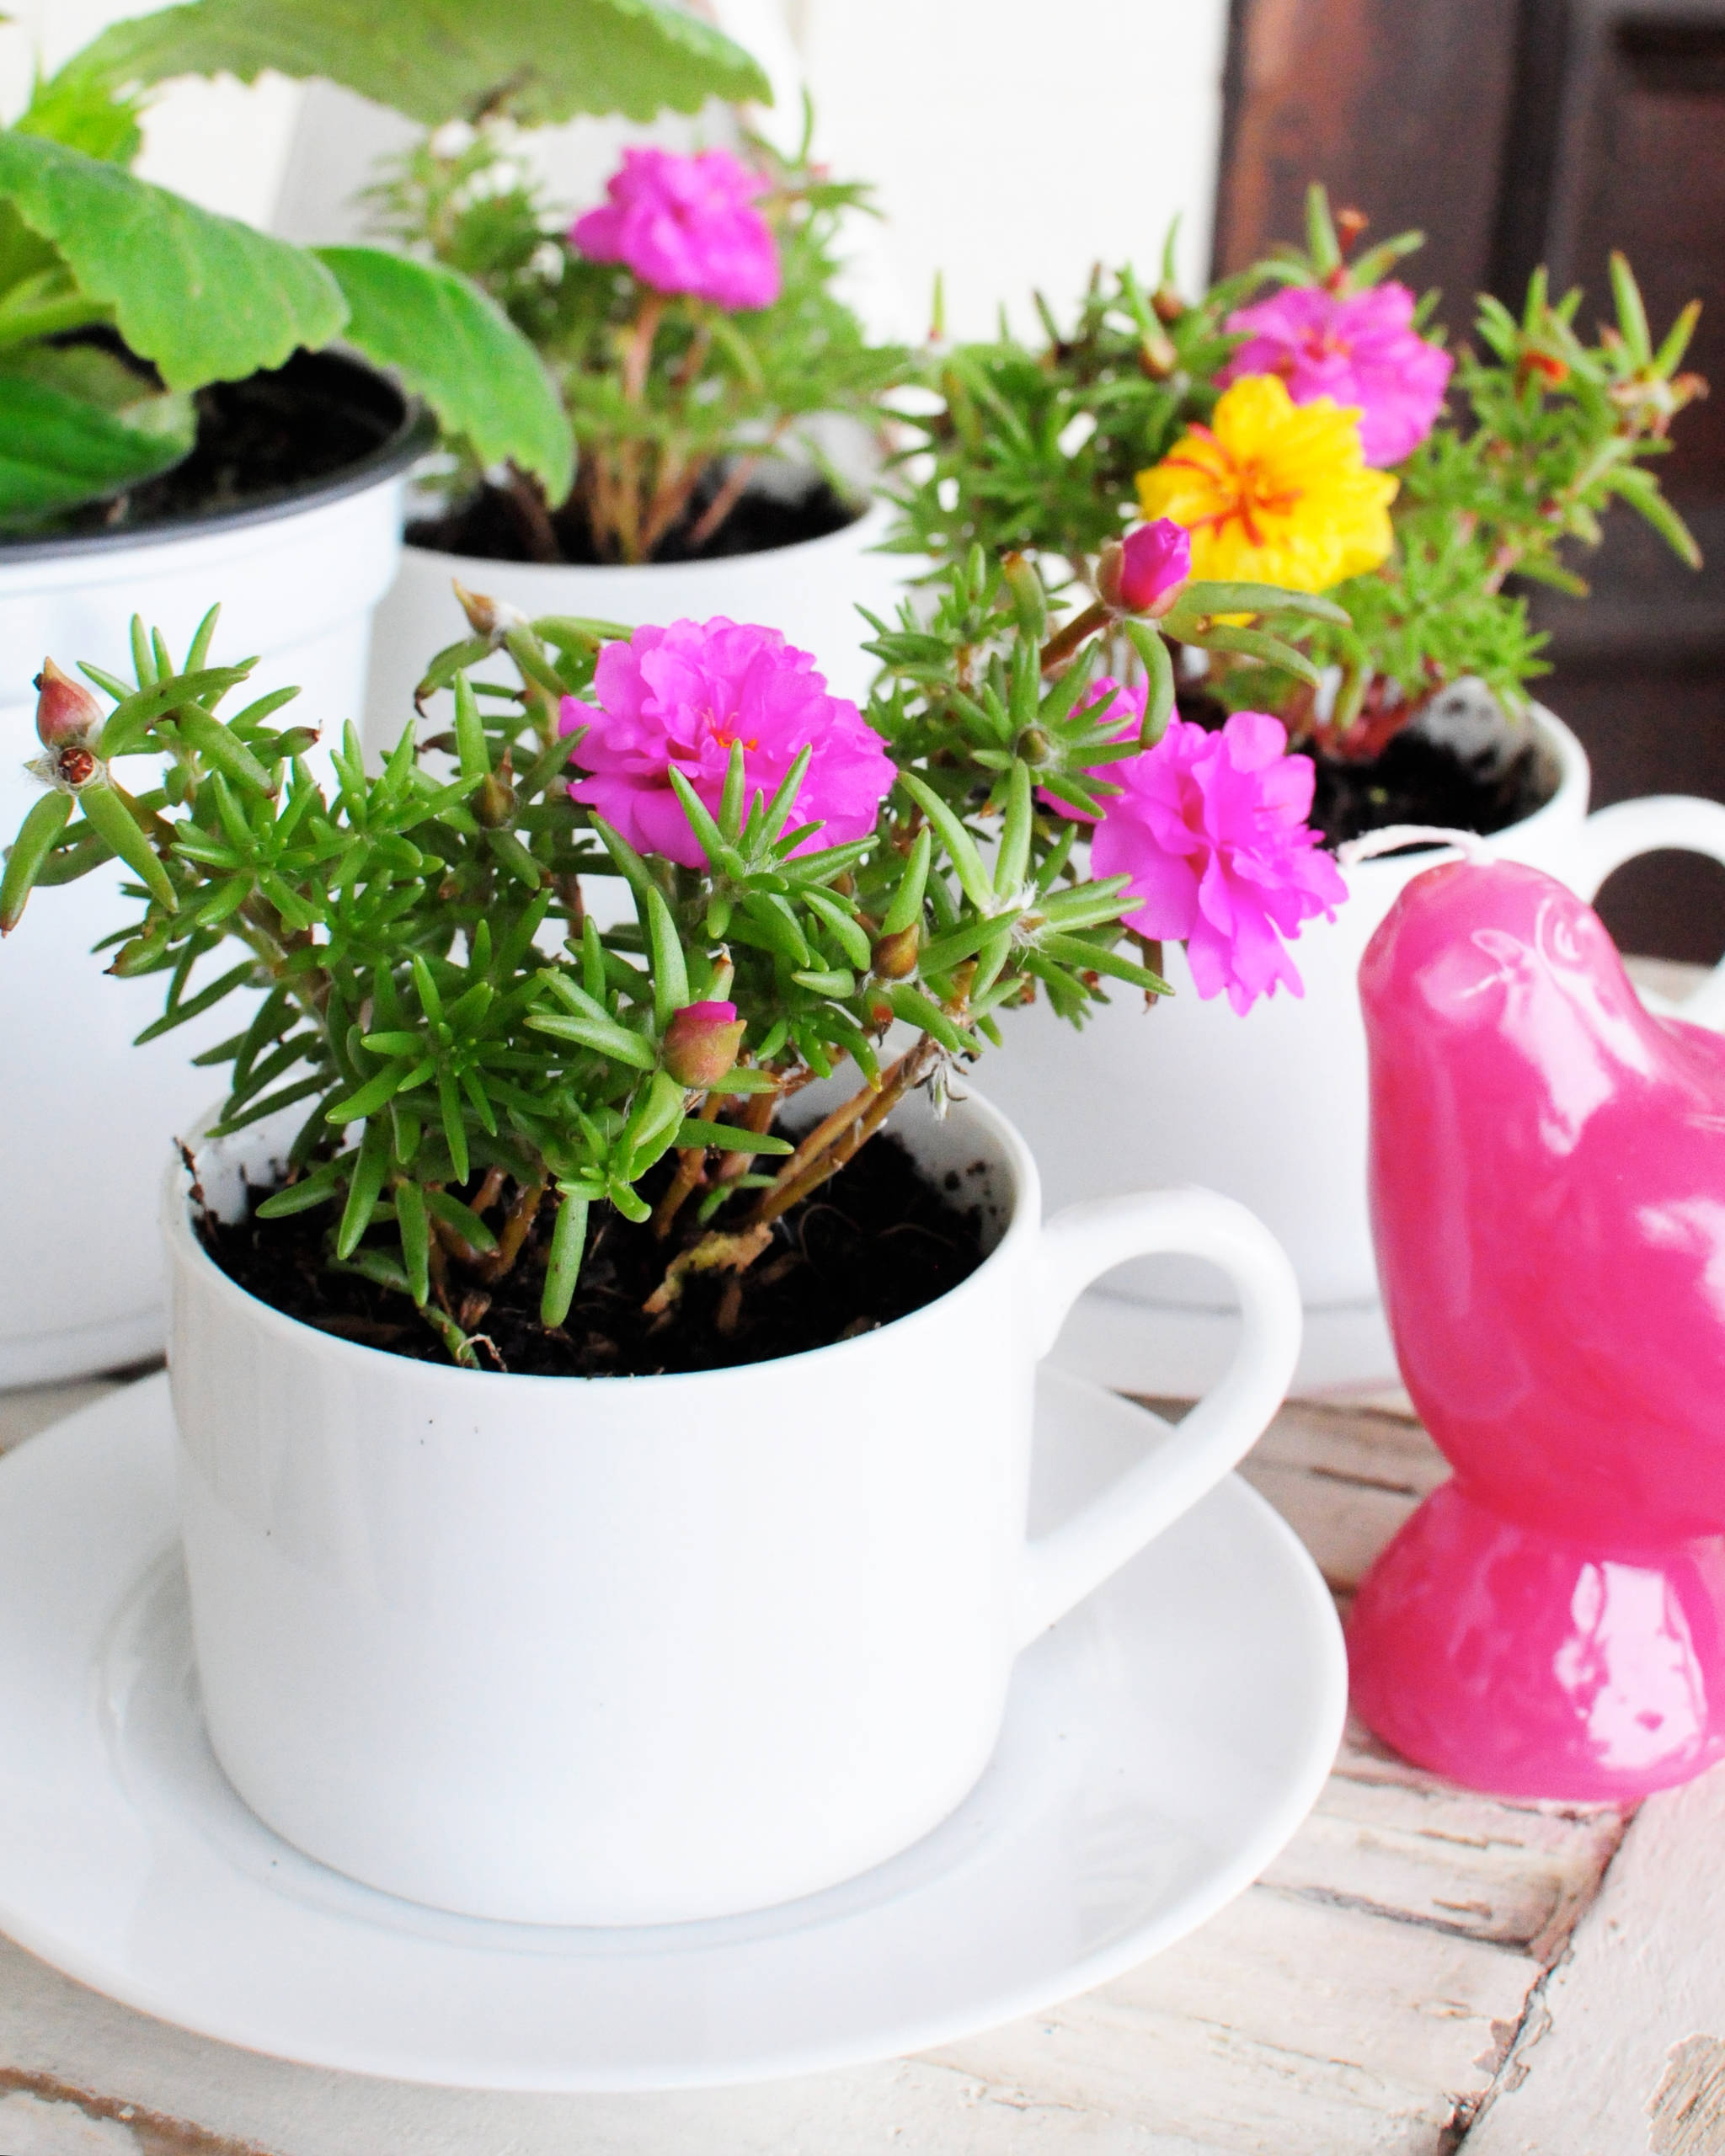 Craft: Turn Your Old Teacups Into Beautiful Planters | Houzz UK